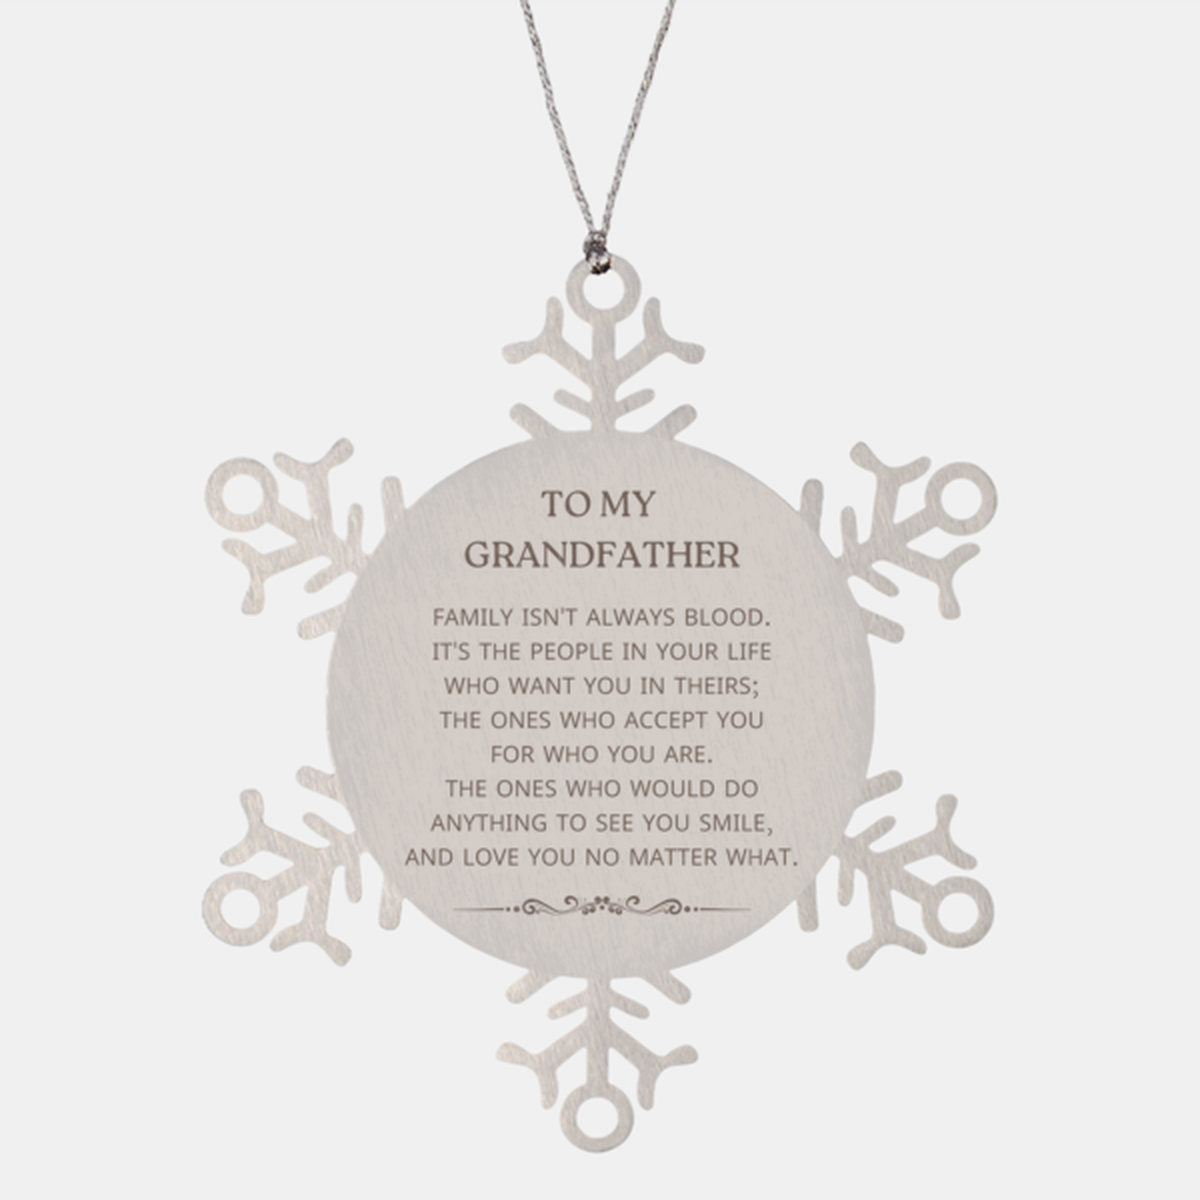 To My Grandfather Gifts, Family isn't always blood, Grandfather Snowflake Ornament, Birthday Christmas Unique Present For Grandfather